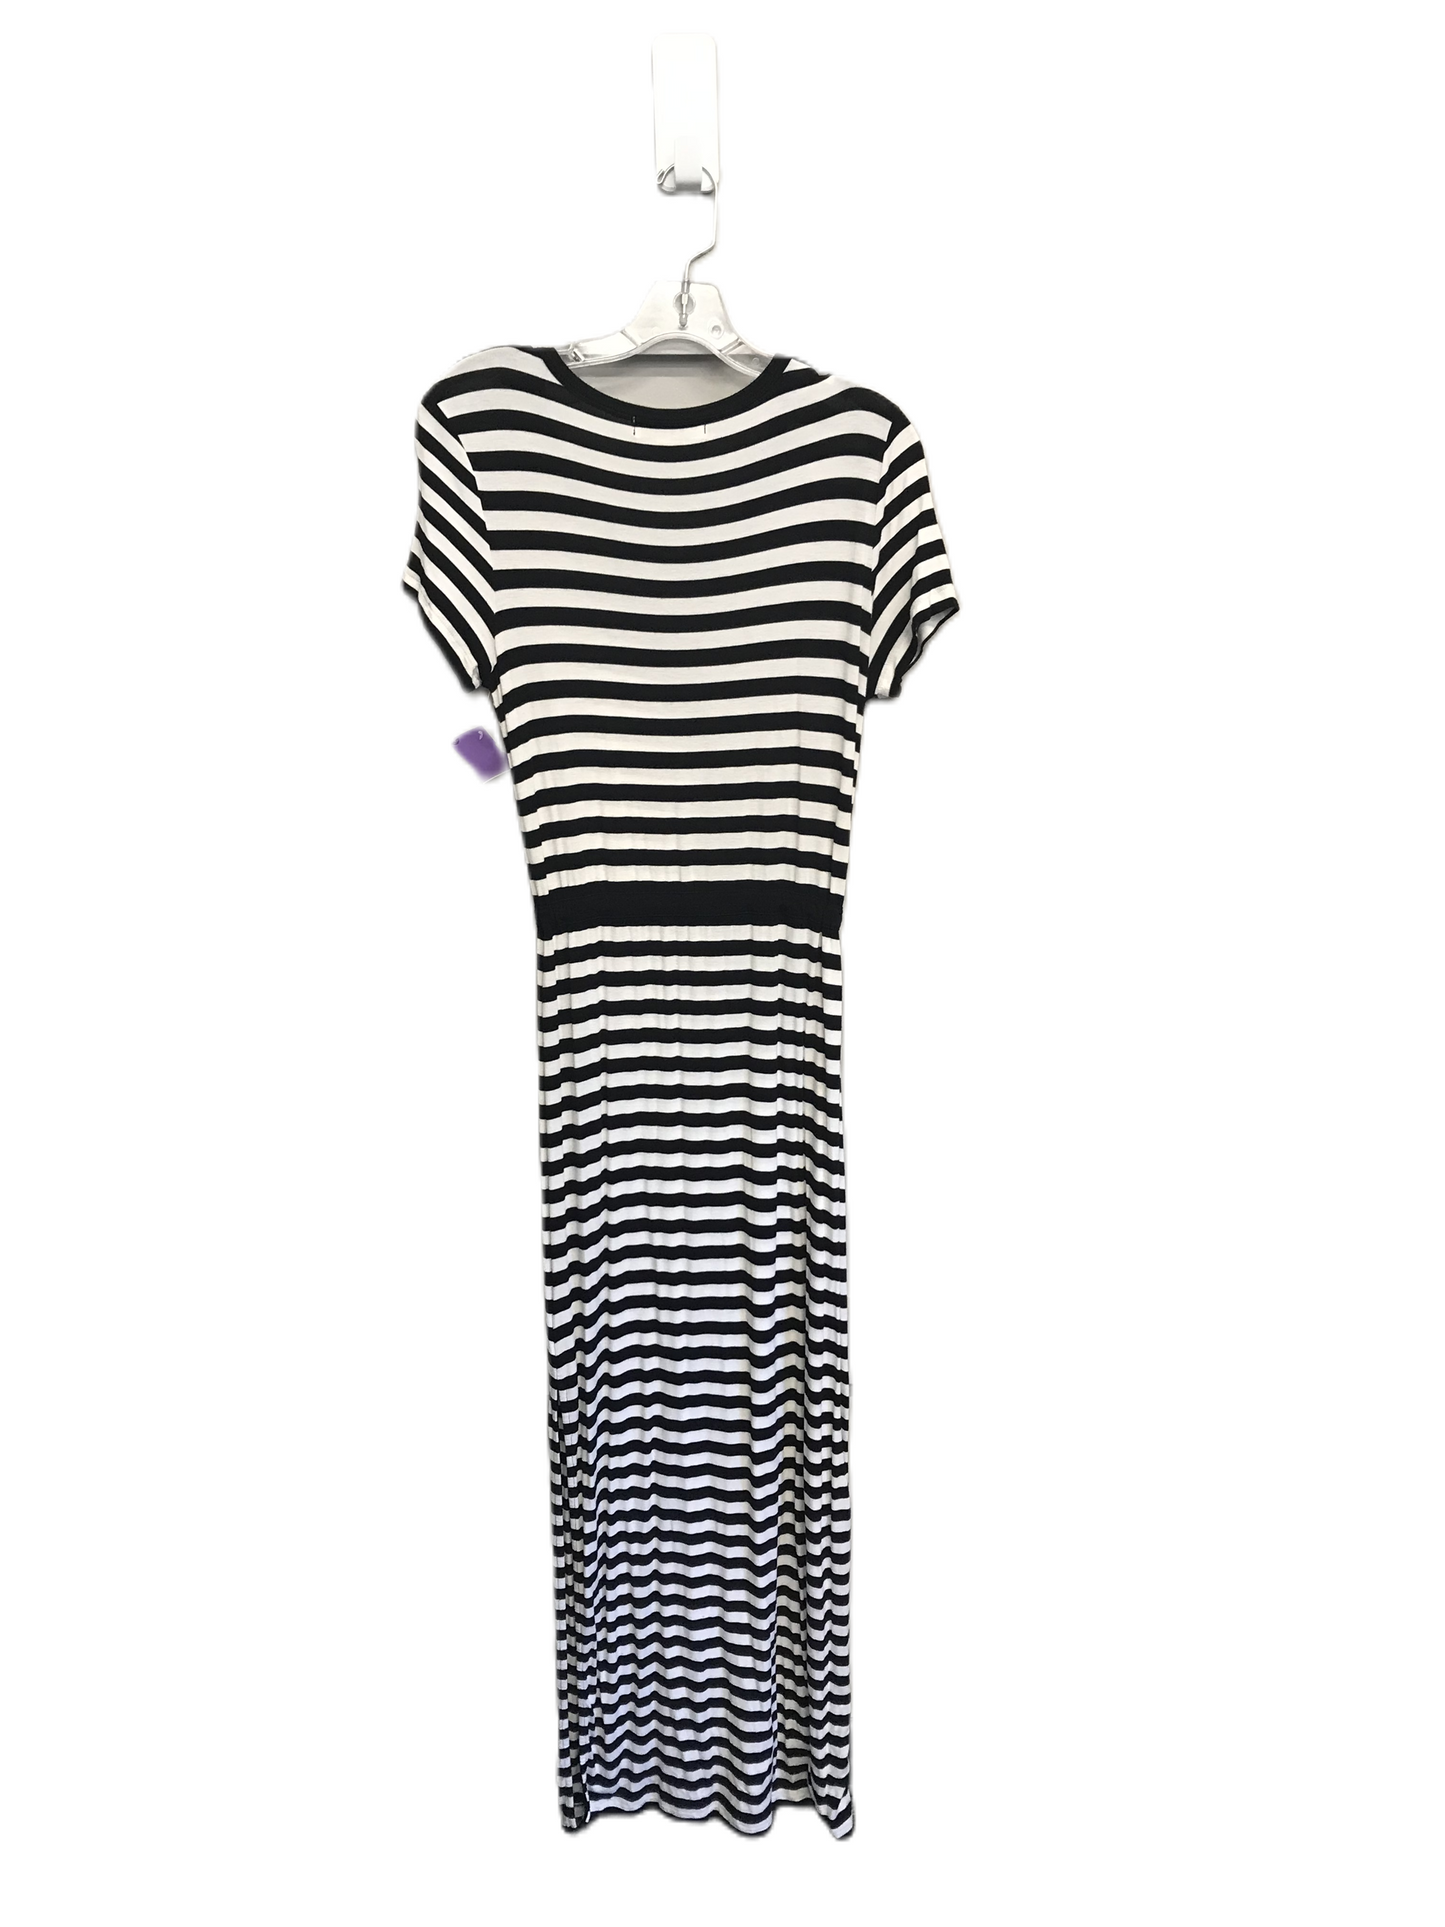 Black & White Dress Casual Maxi By Michael By Michael Kors, Size: 8